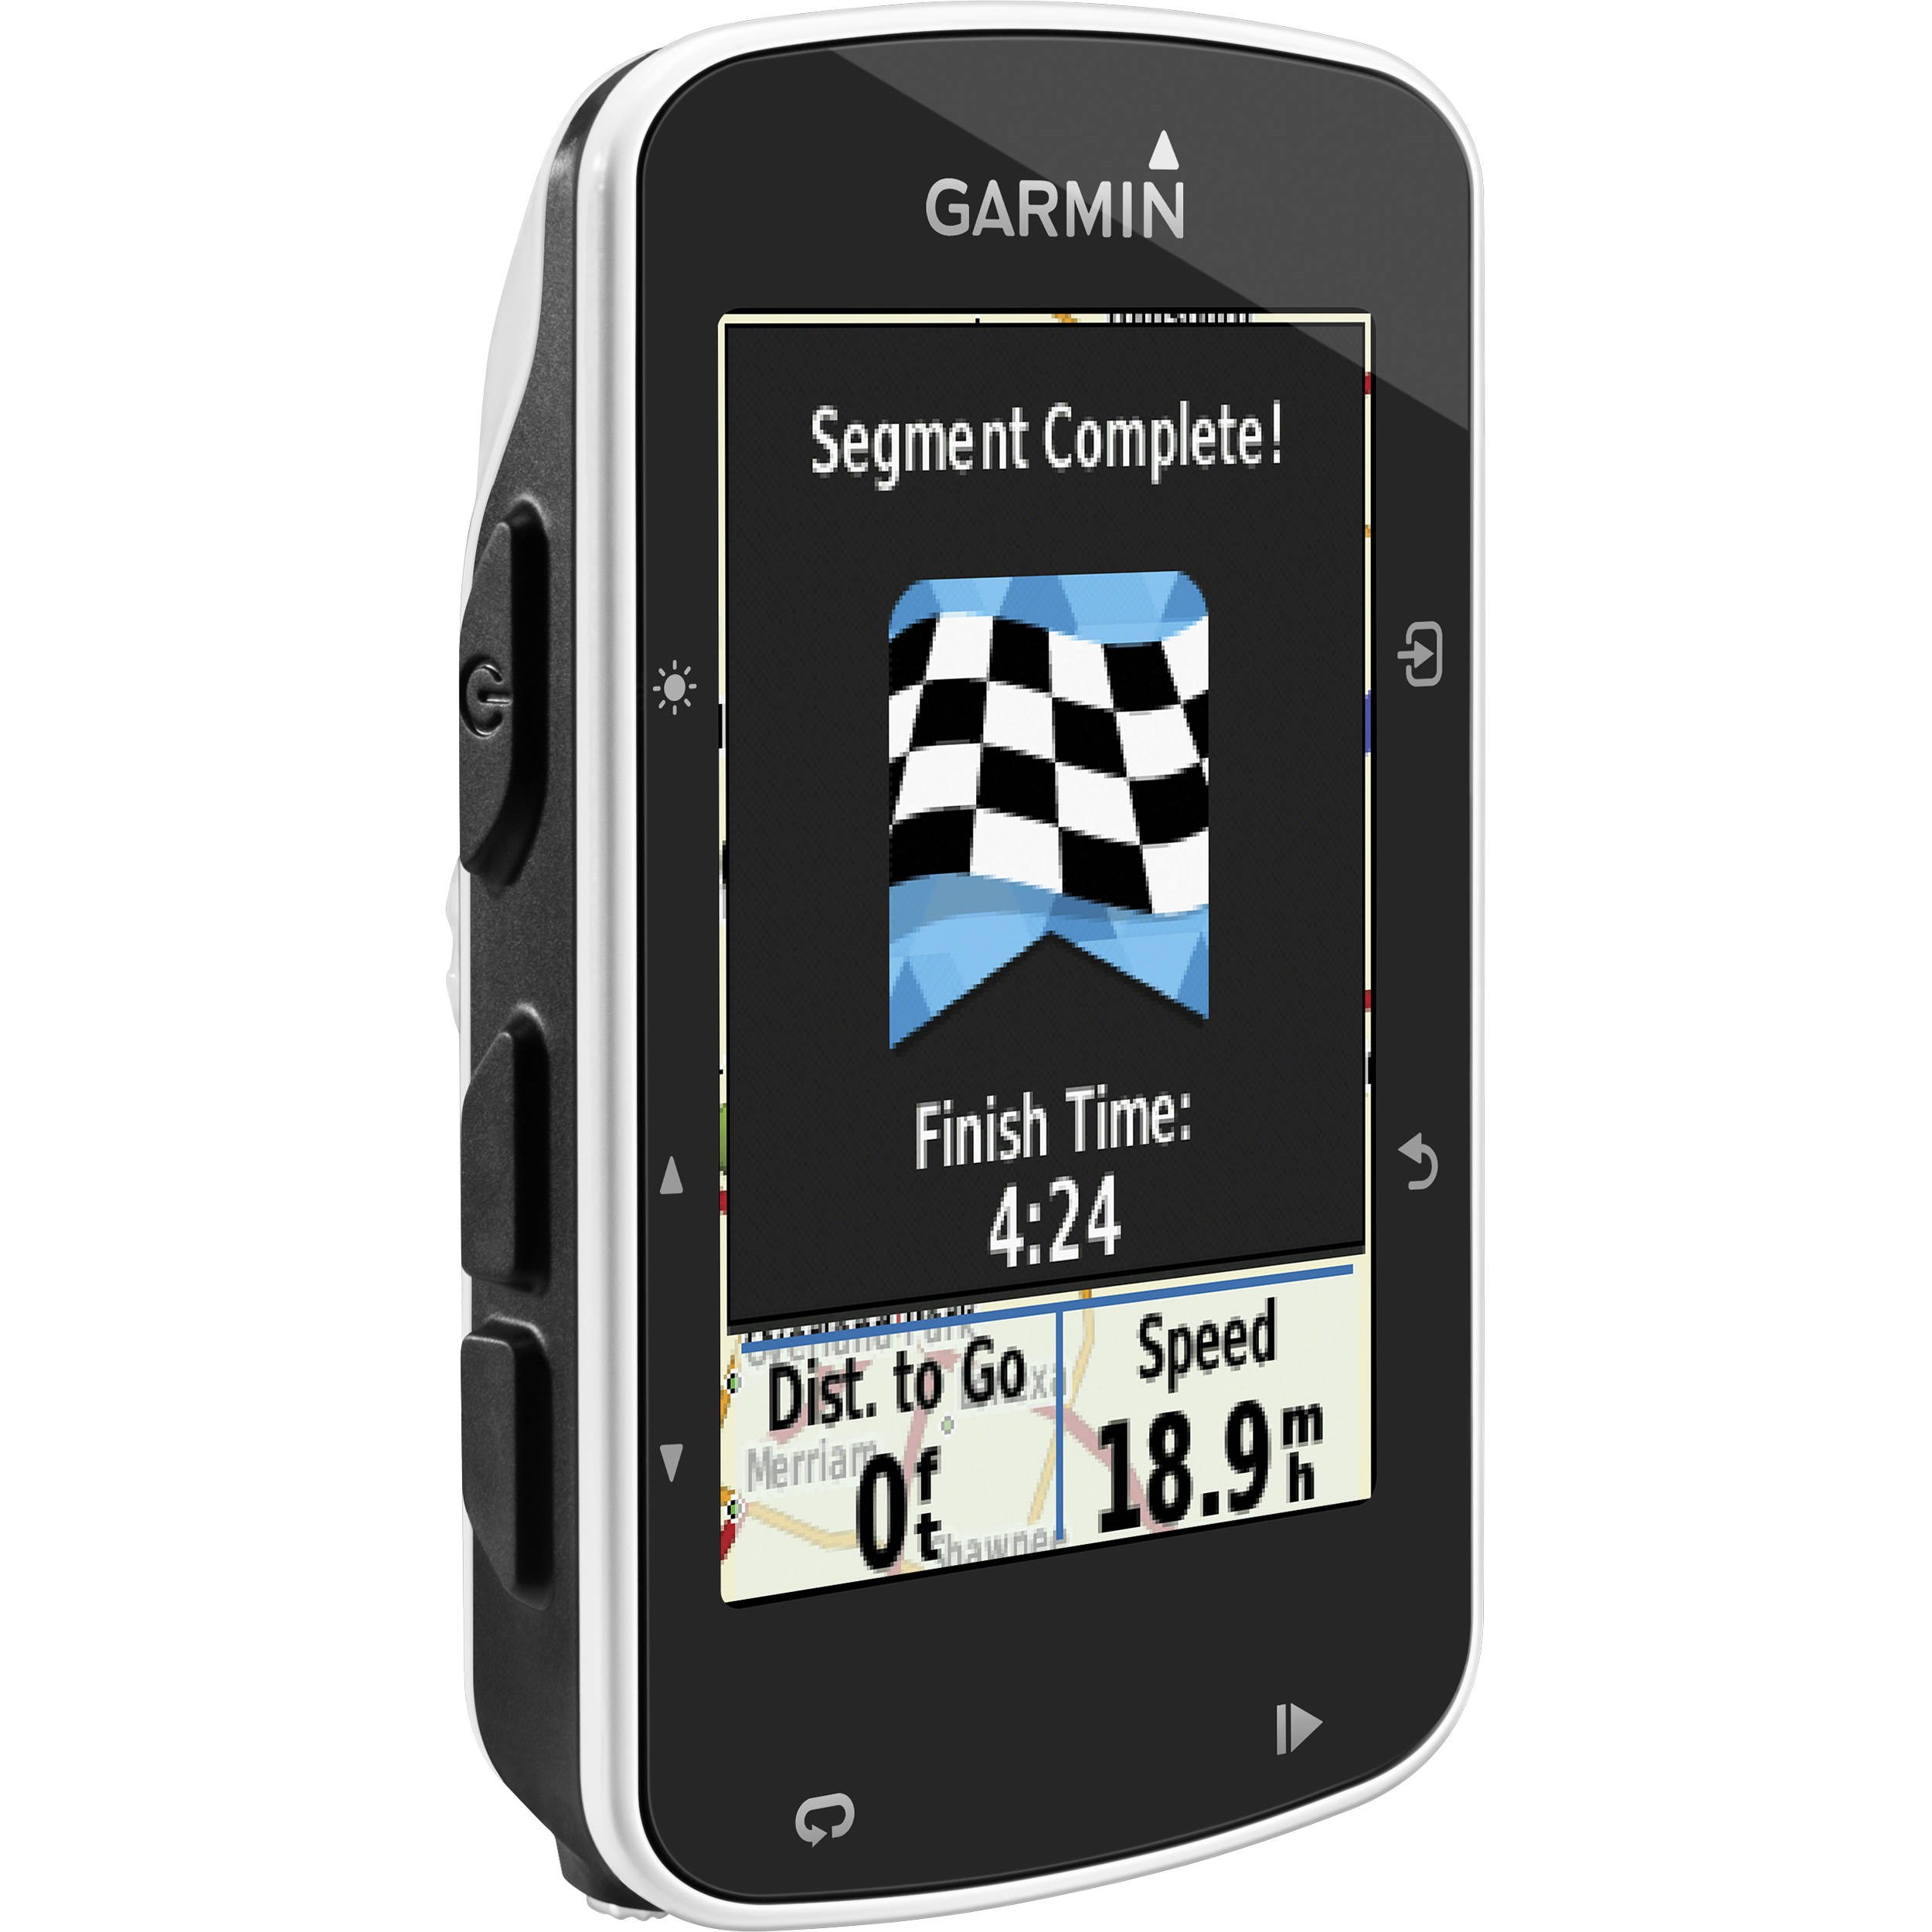 Incubus systematisk Faktura The Garmin Edge 520 Plus updates the rider-favorite Edge 520 with advanced  navigation, built-in challenges, and improved smartphone integration. With  its GPS and GLONASS connectivity, the Edge 520 Plus can track position,